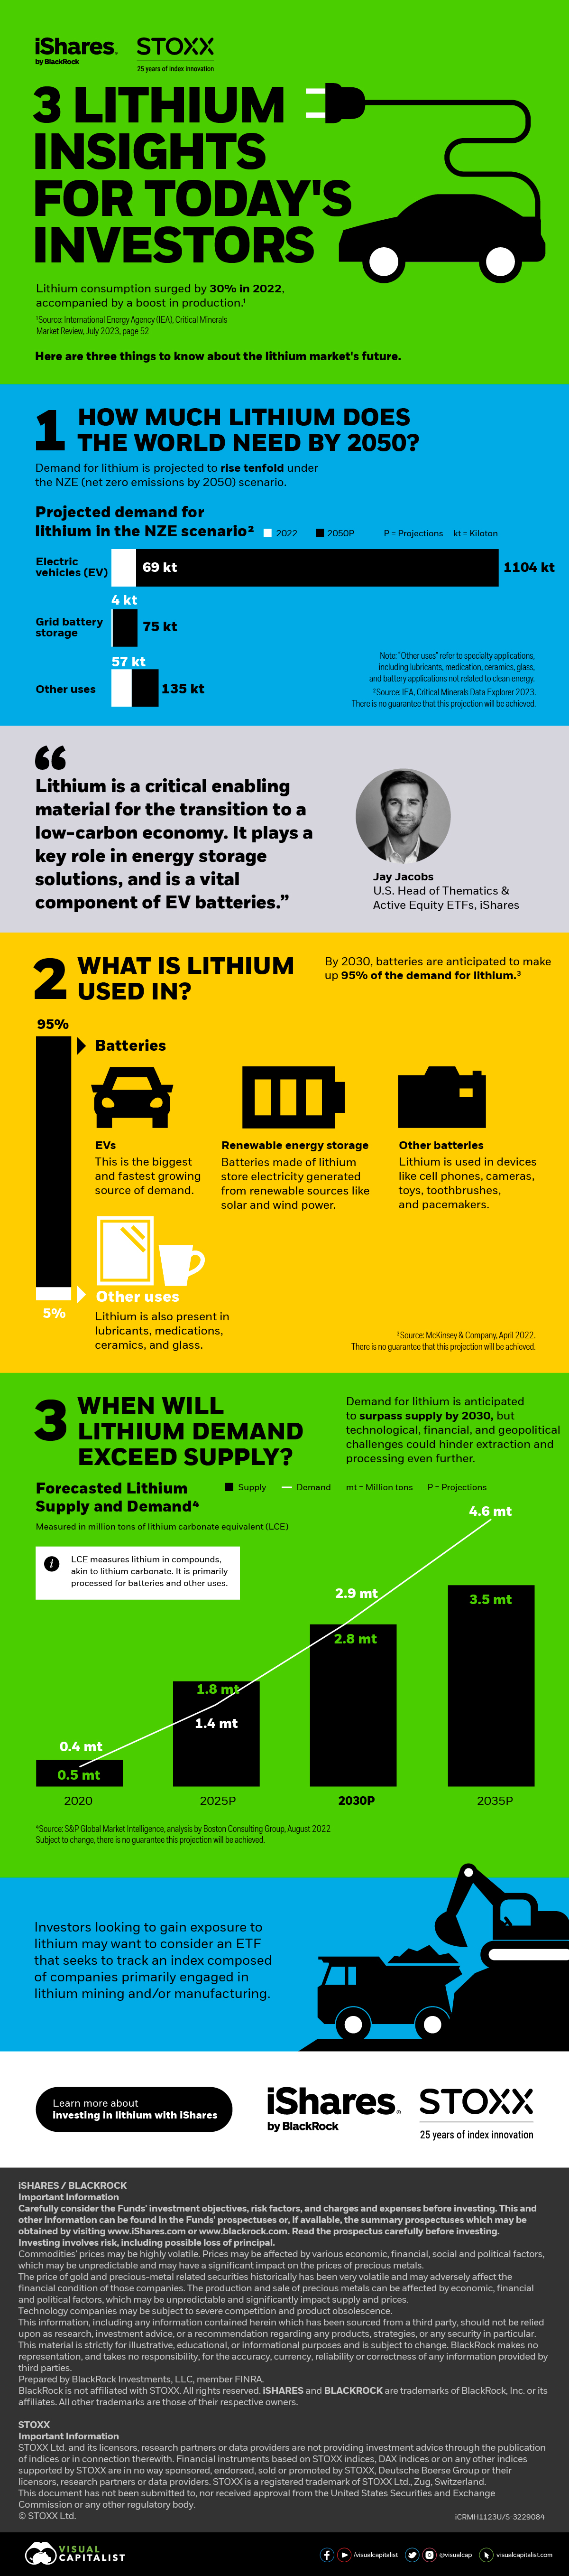 3 Lithium Insights for today's investors infographic